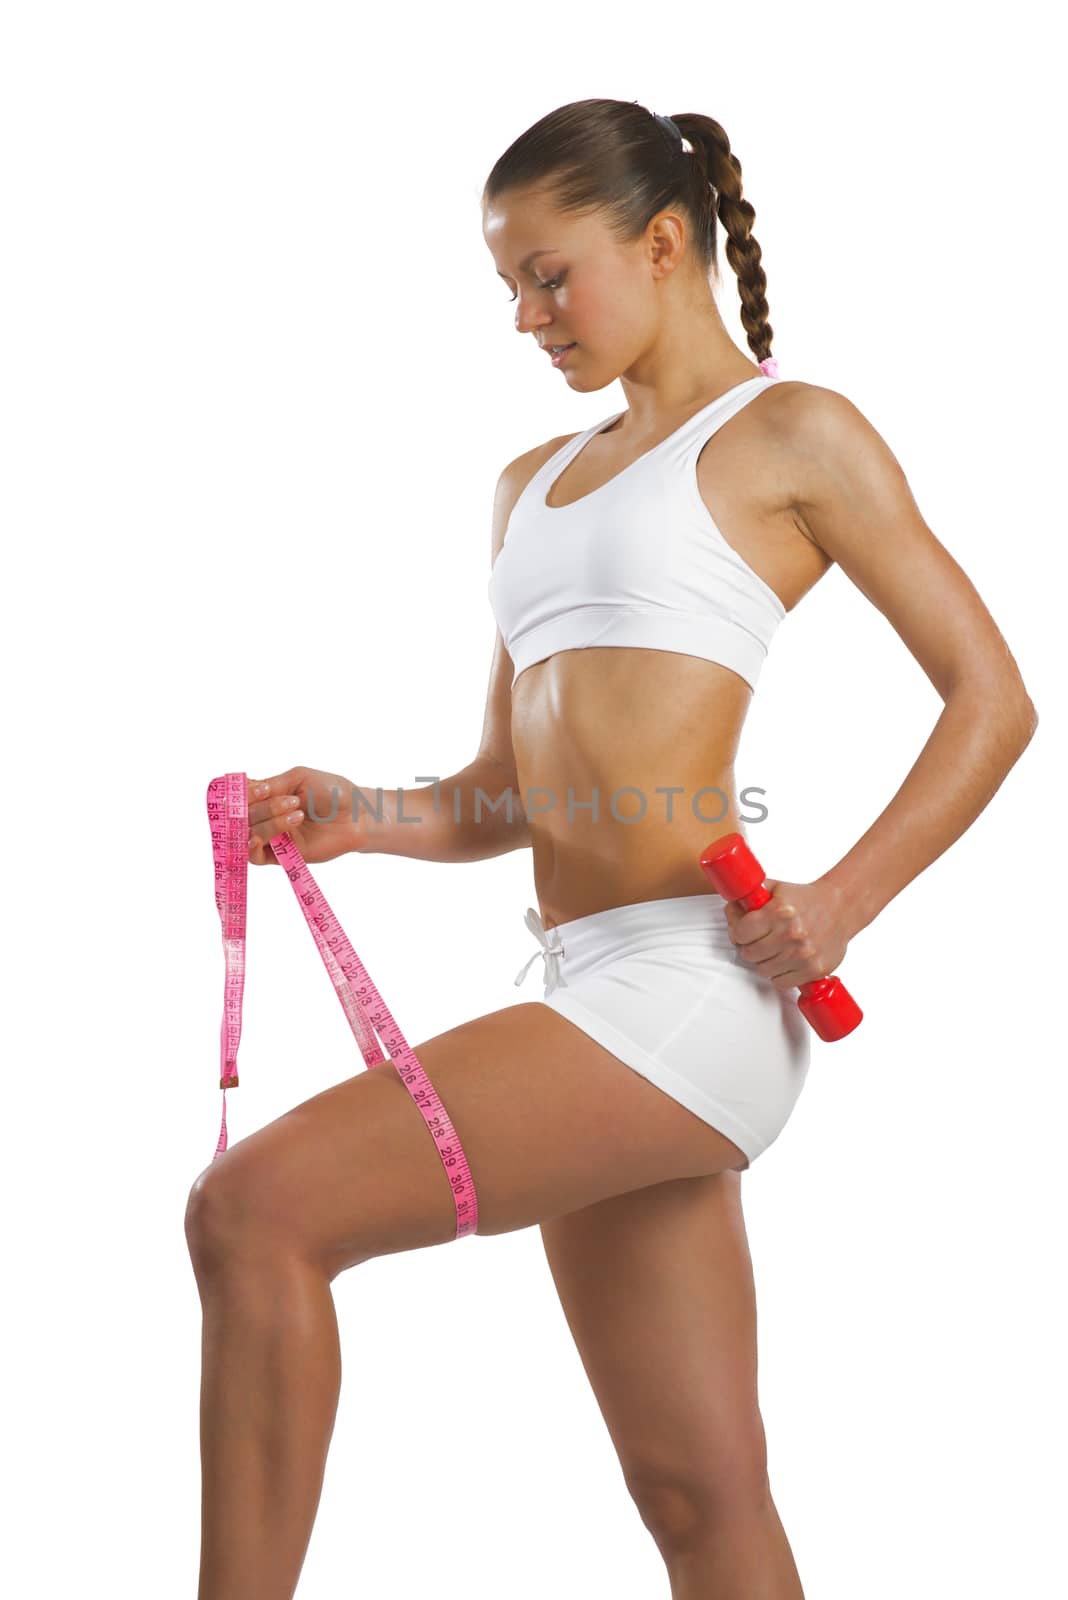 image of a young attractive woman with measuring tape and red dumbbells